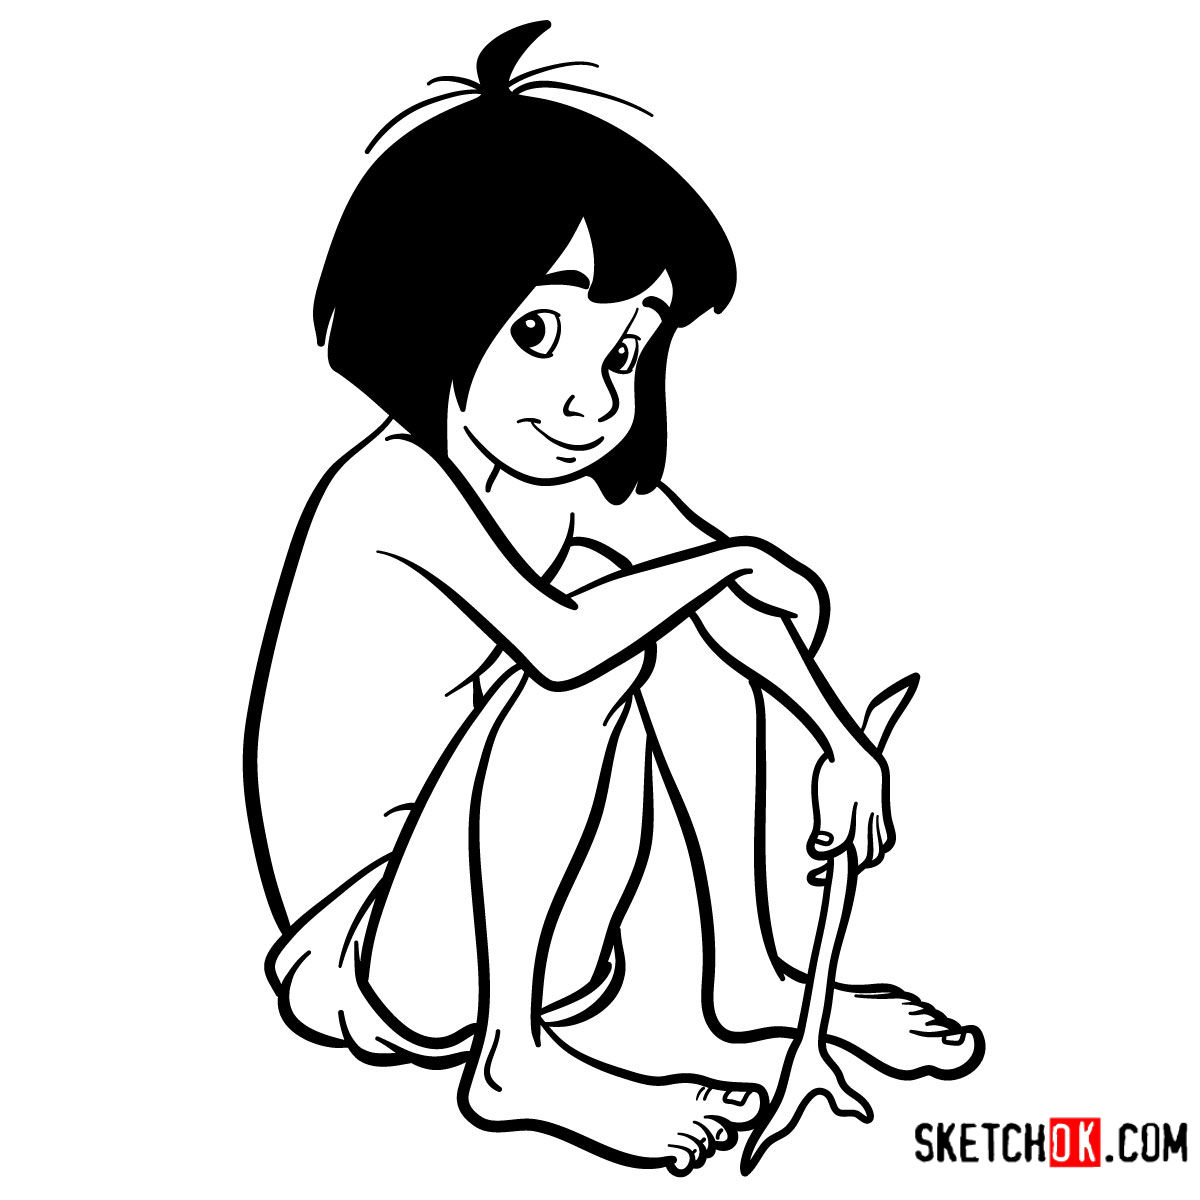 How To Draw Mowgli The Jungle Book Sketchok Easy Drawing Guides